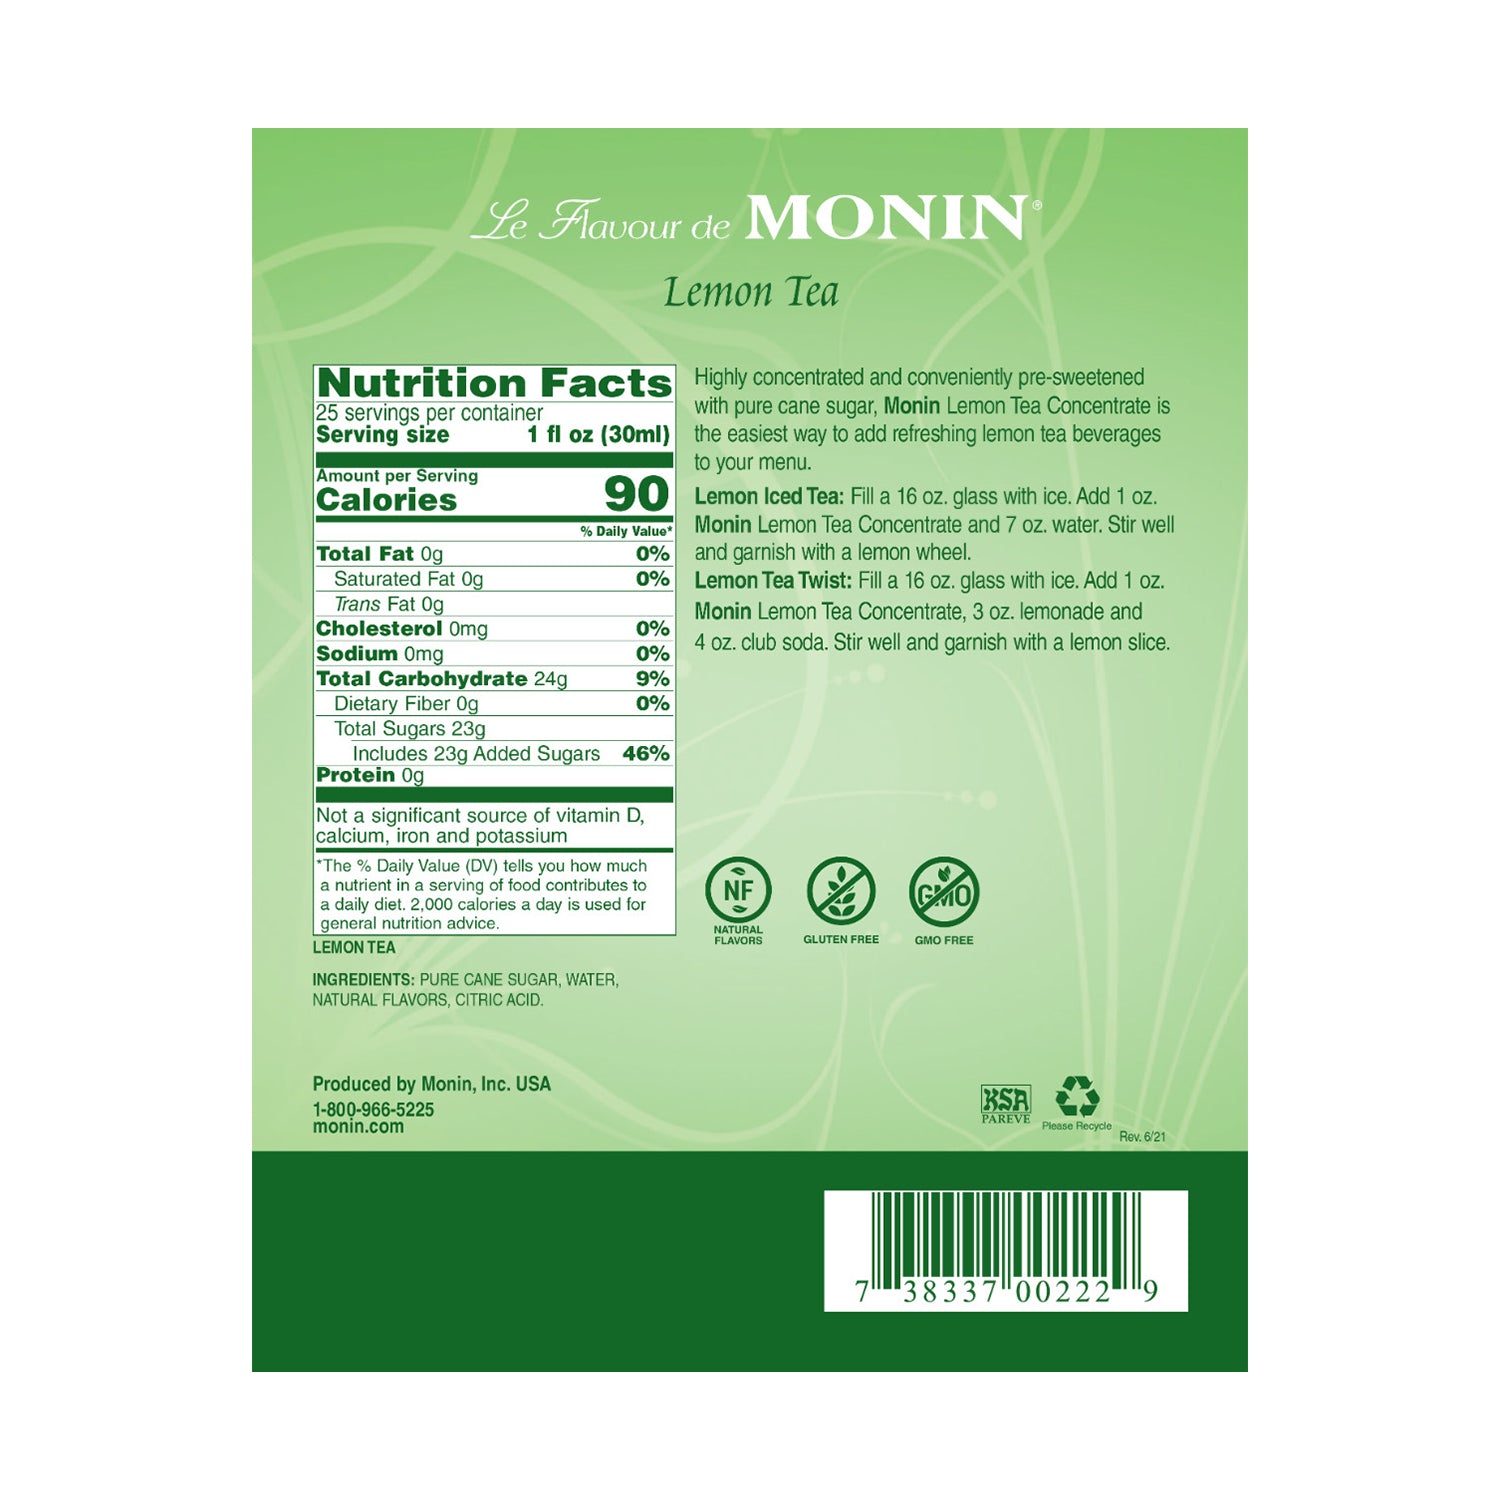 Monin Lemon Tea Concentrate Syrup nutrition facts and directions label